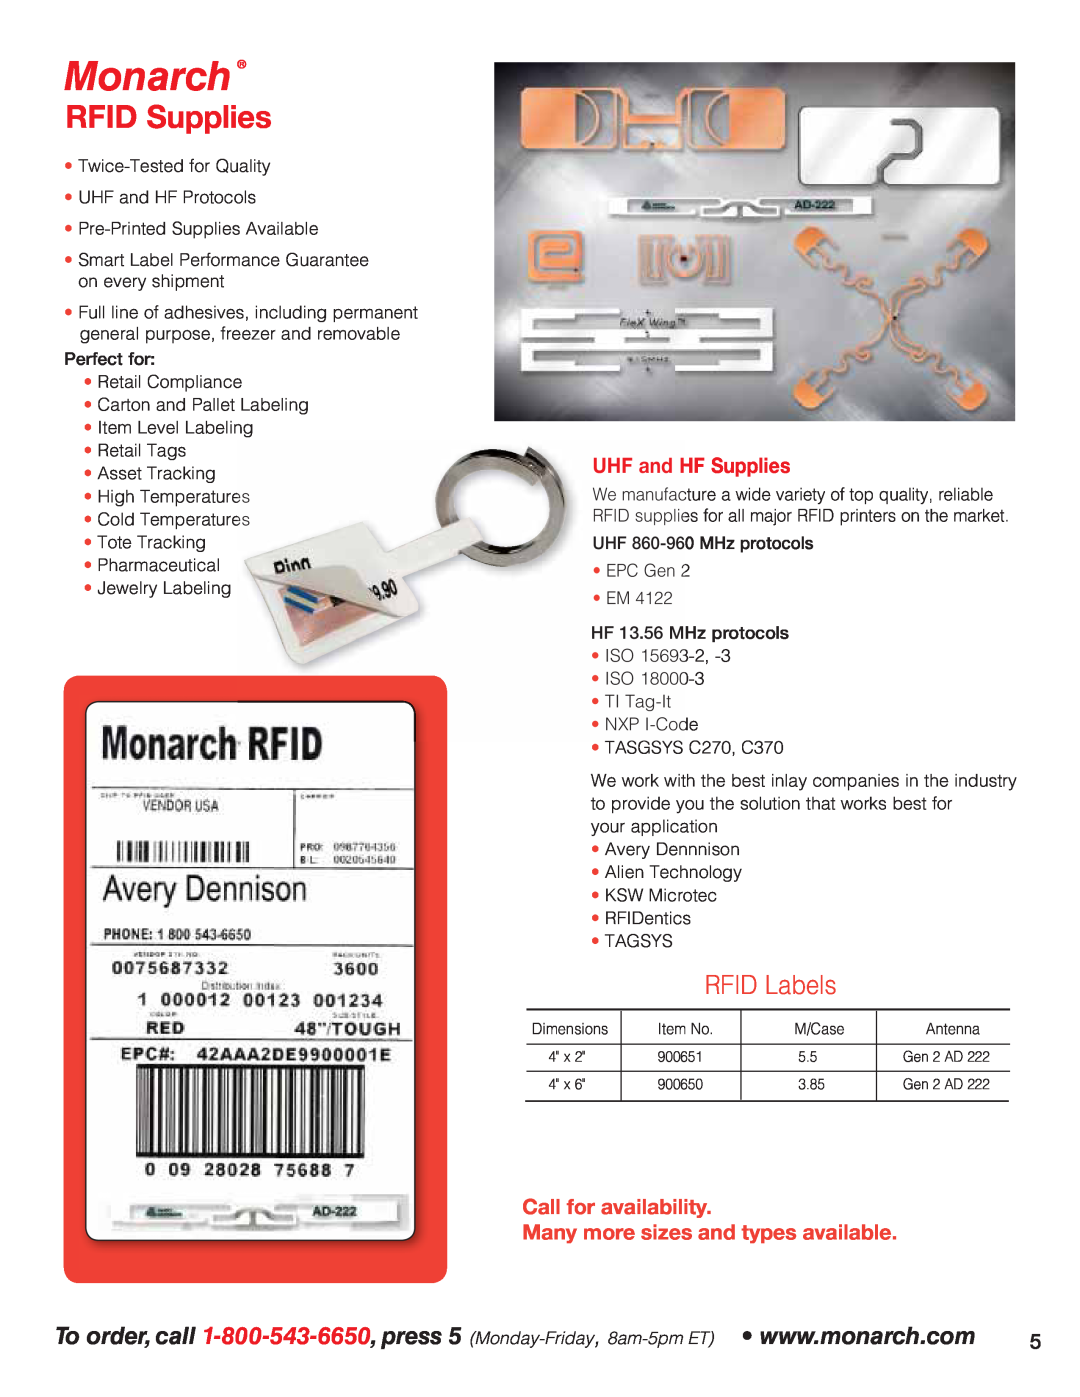 Avery 6039 RFID Supplies, RFID Labels, UHF and HF Supplies, Call for availability Many more sizes and types available 